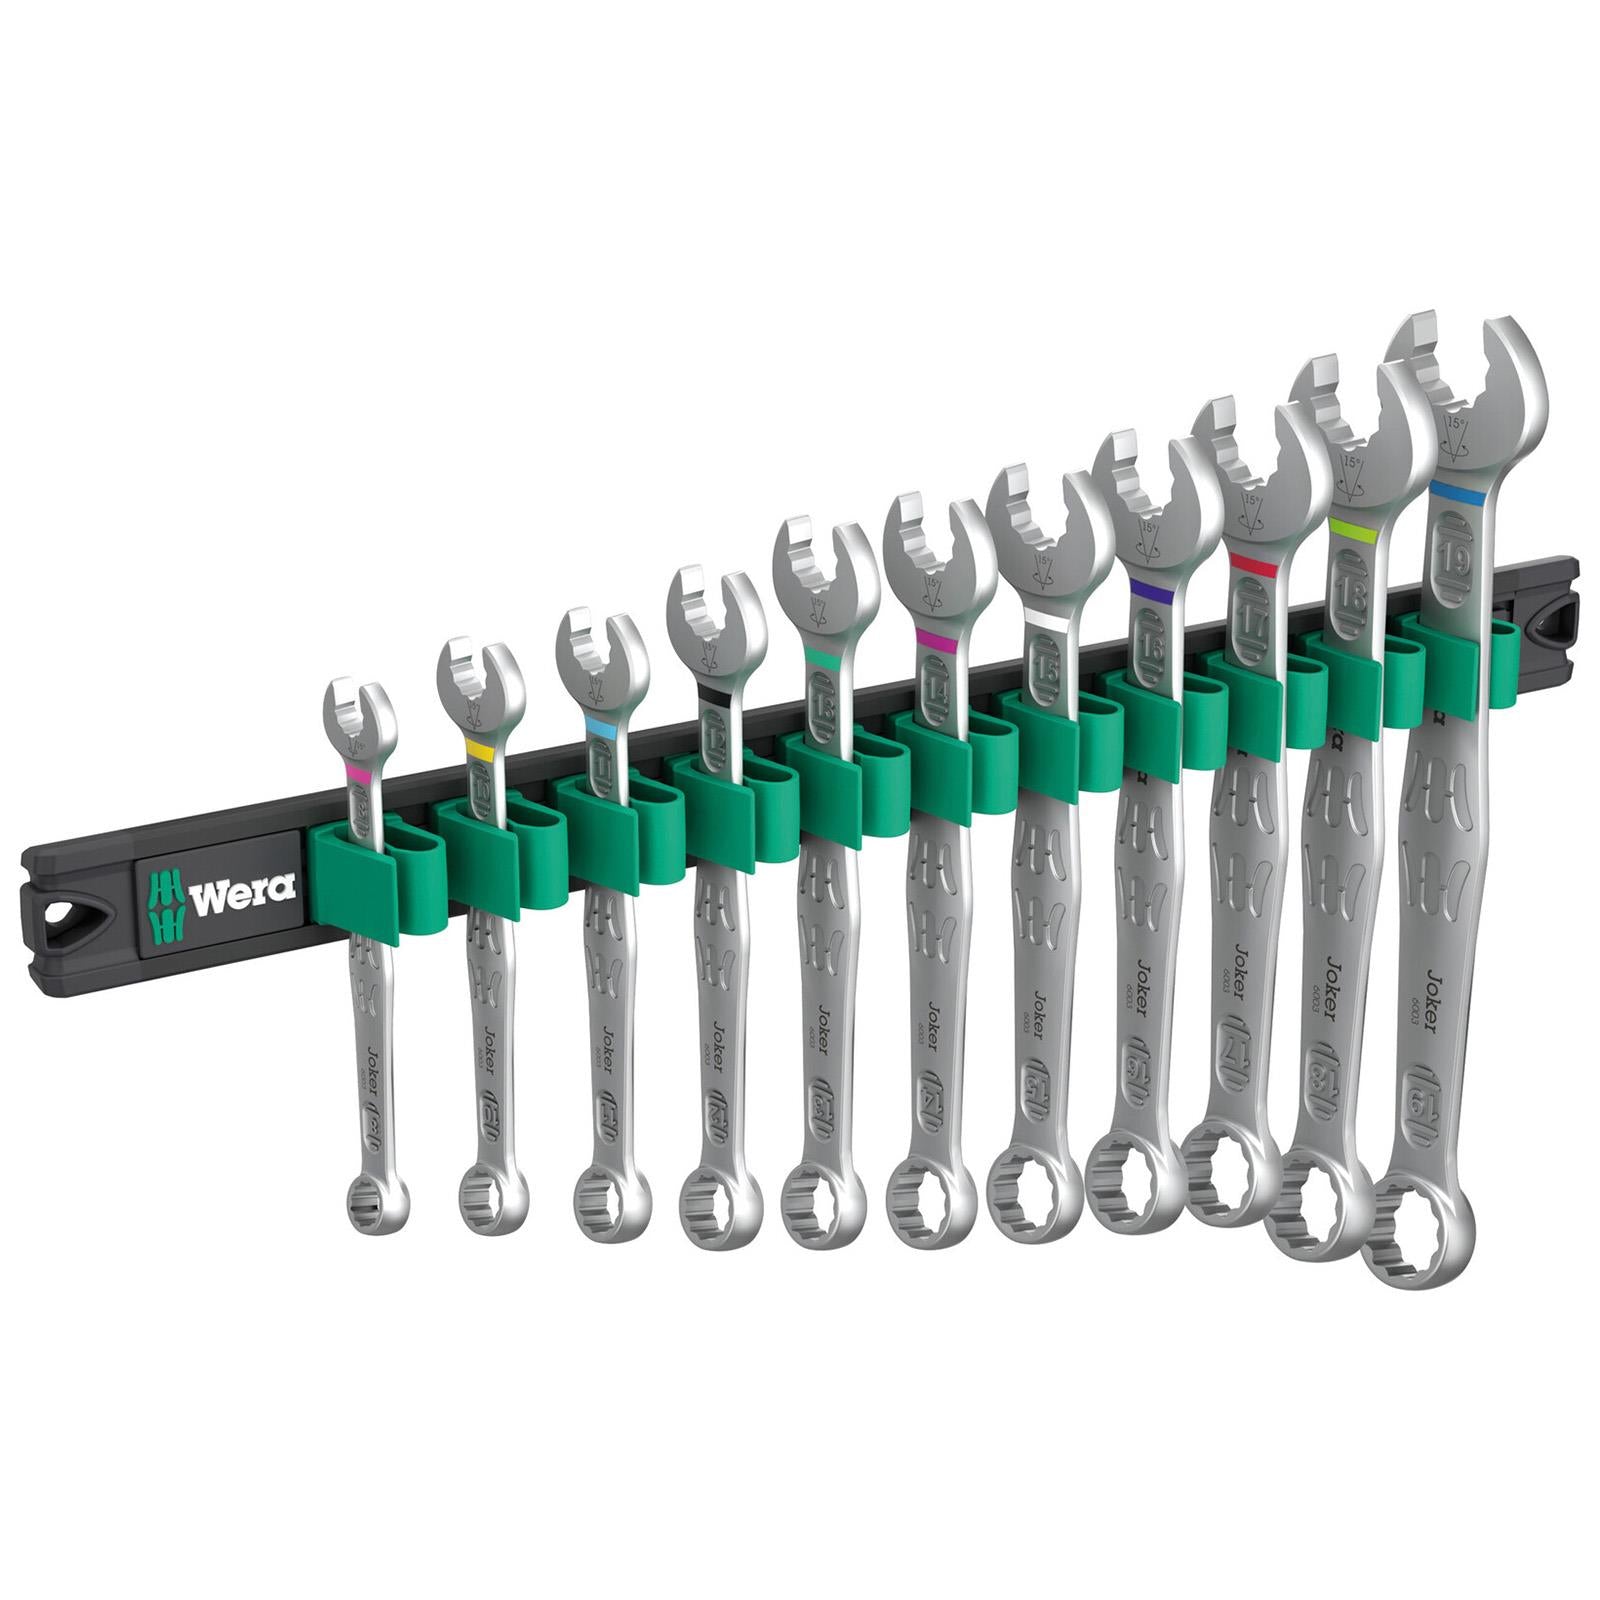 Wera Combination Spanner Wrench Set 6003 Joker 1 9640 Magnetic Rail 11 Pieces 8-19mm